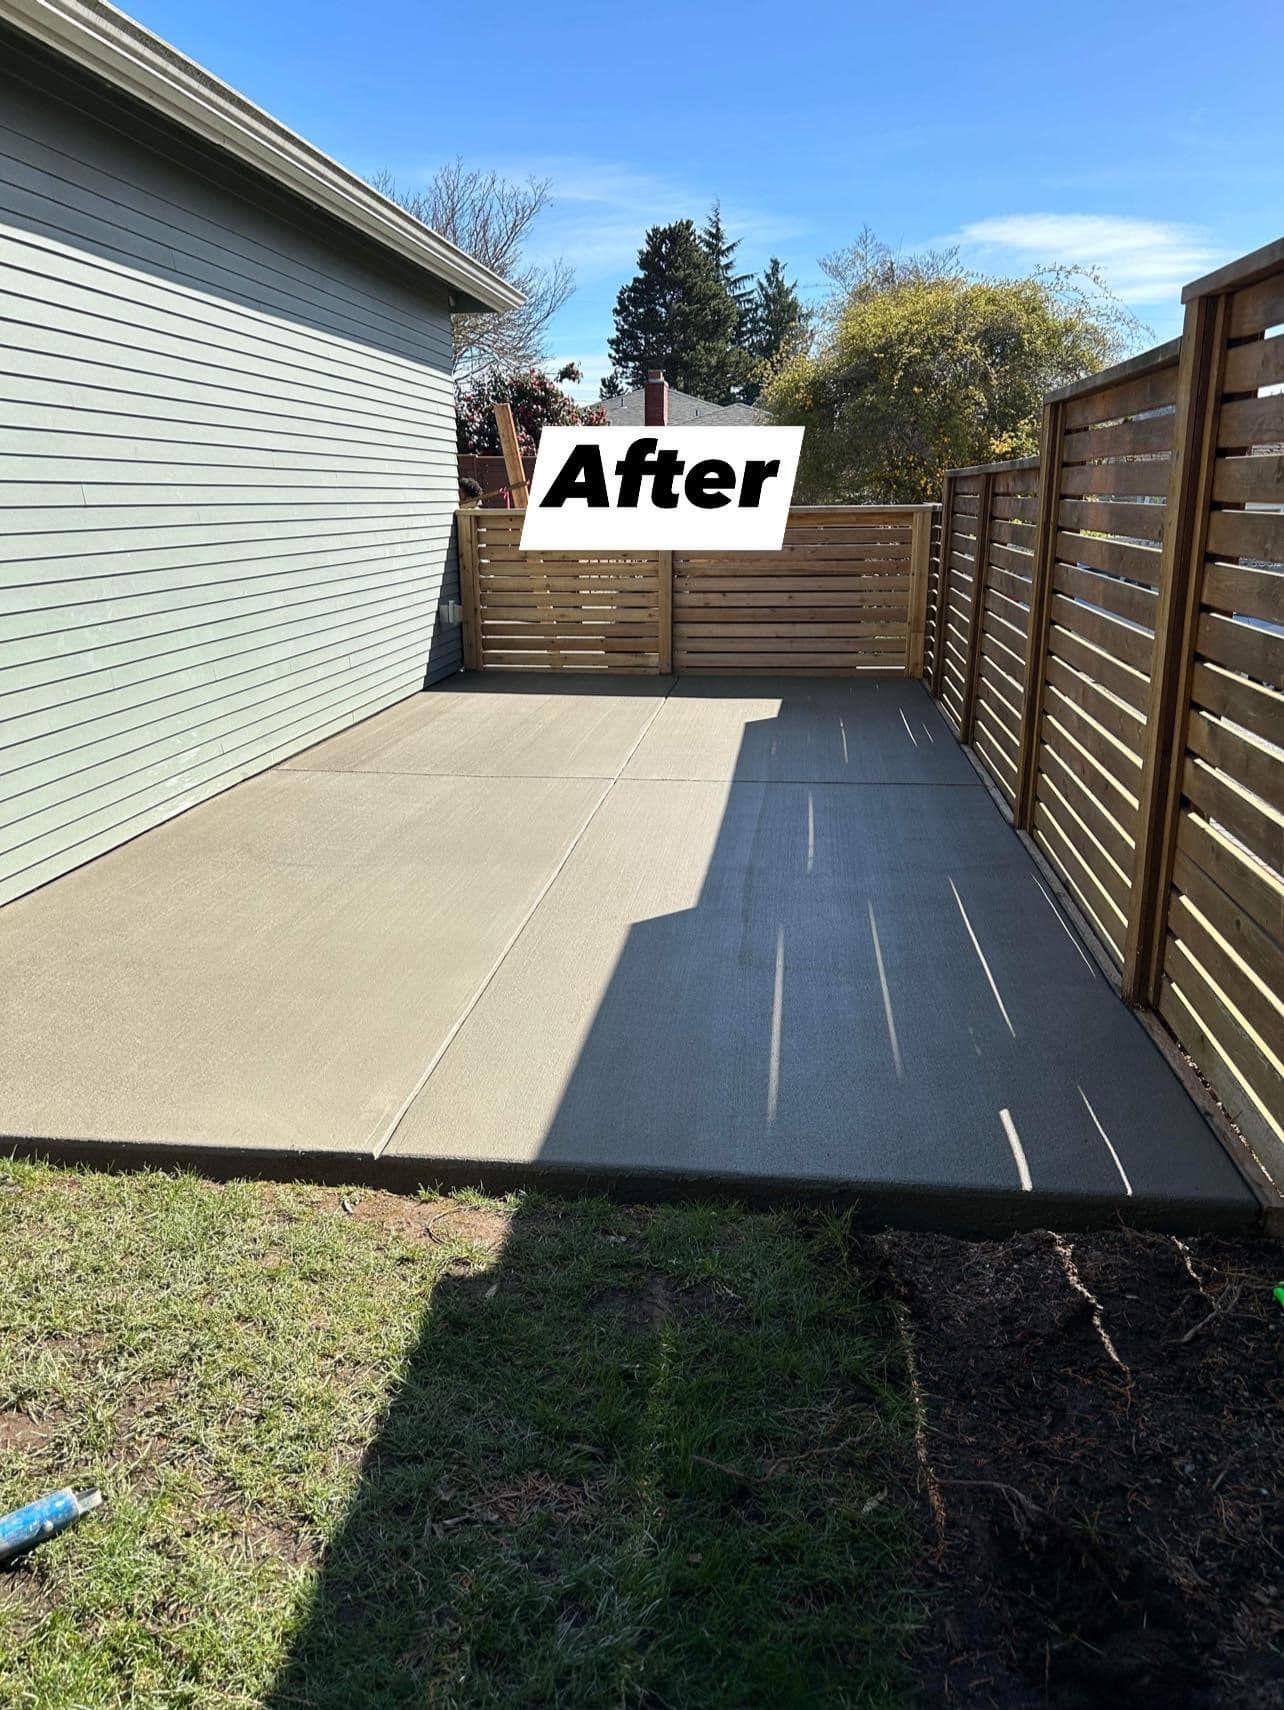 SEATTLE CONCRETE PAD PROJECT - After